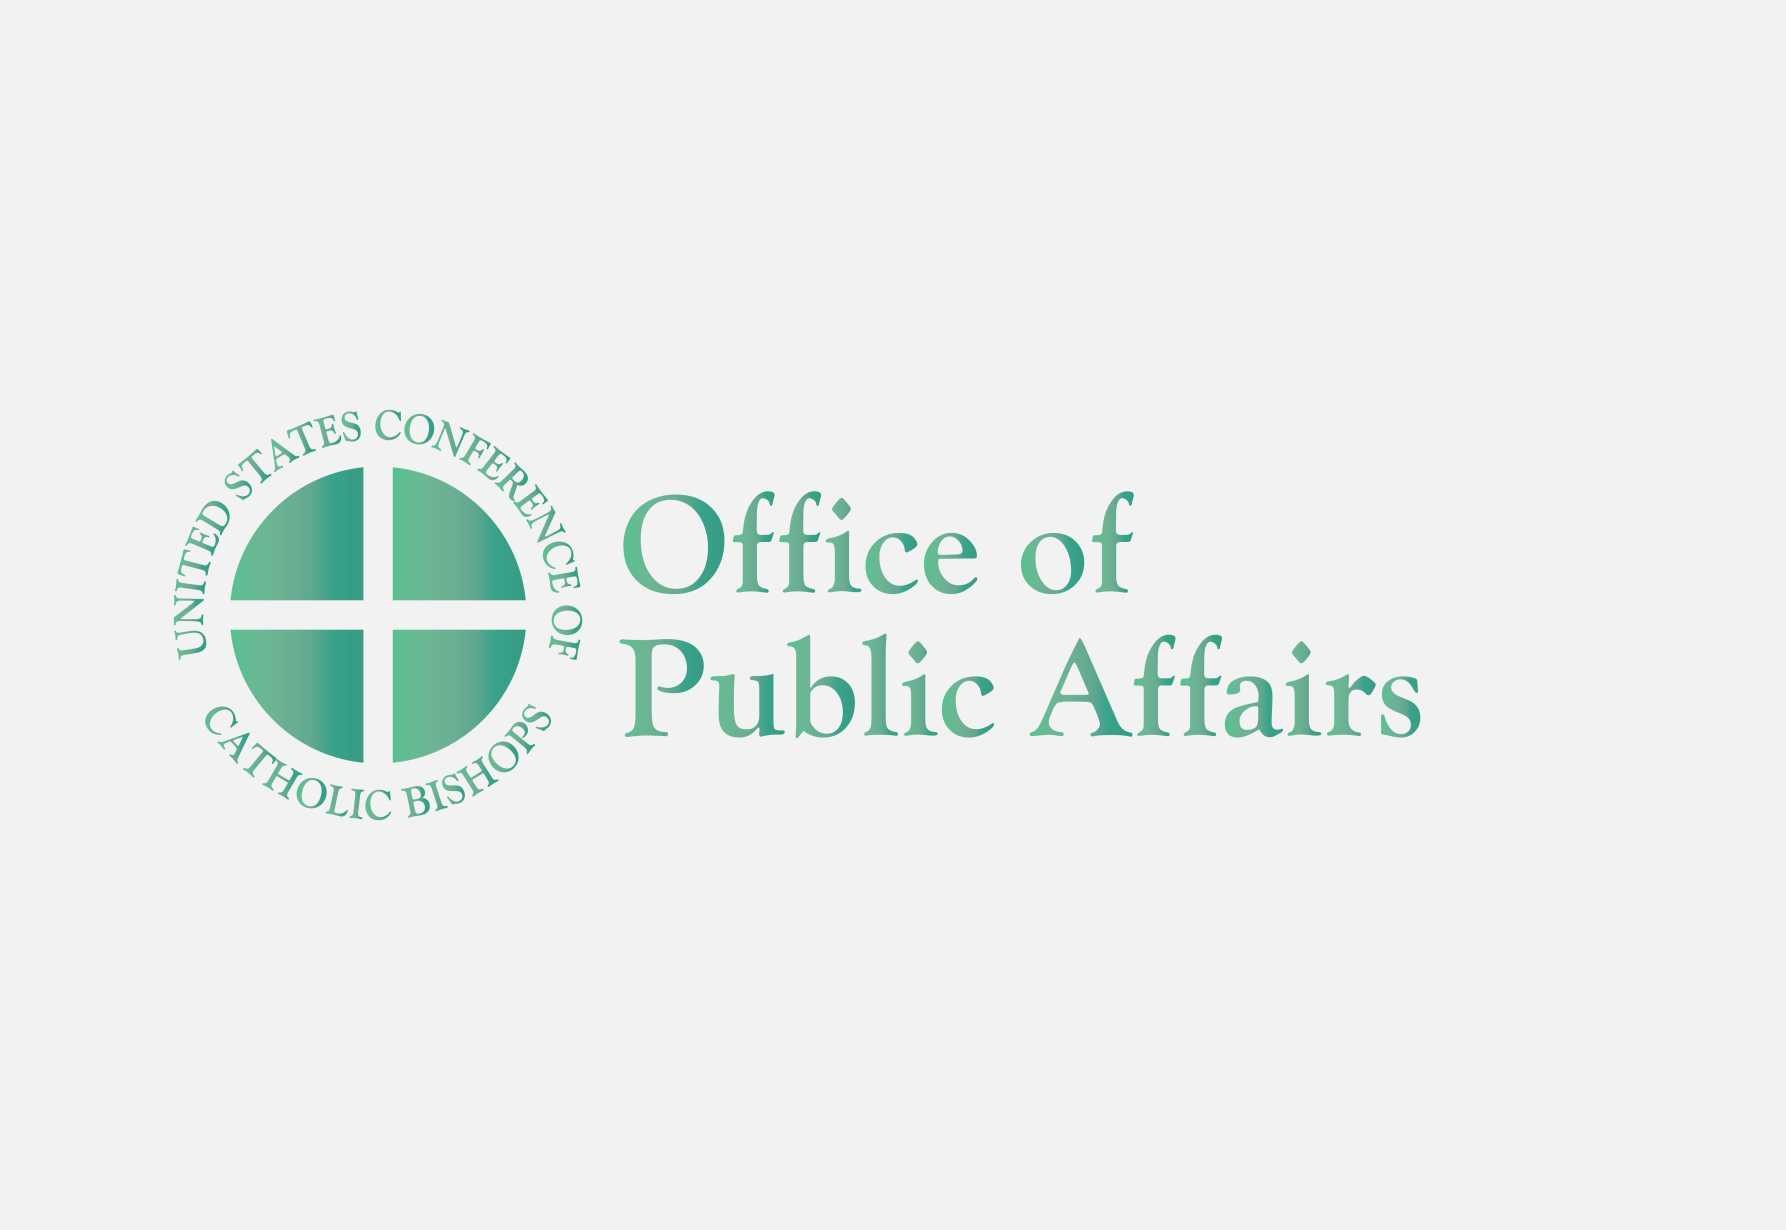 Statement of USCCB Ad Hoc Committee Against Racism on Supreme Court’s Affirmative Action Decision